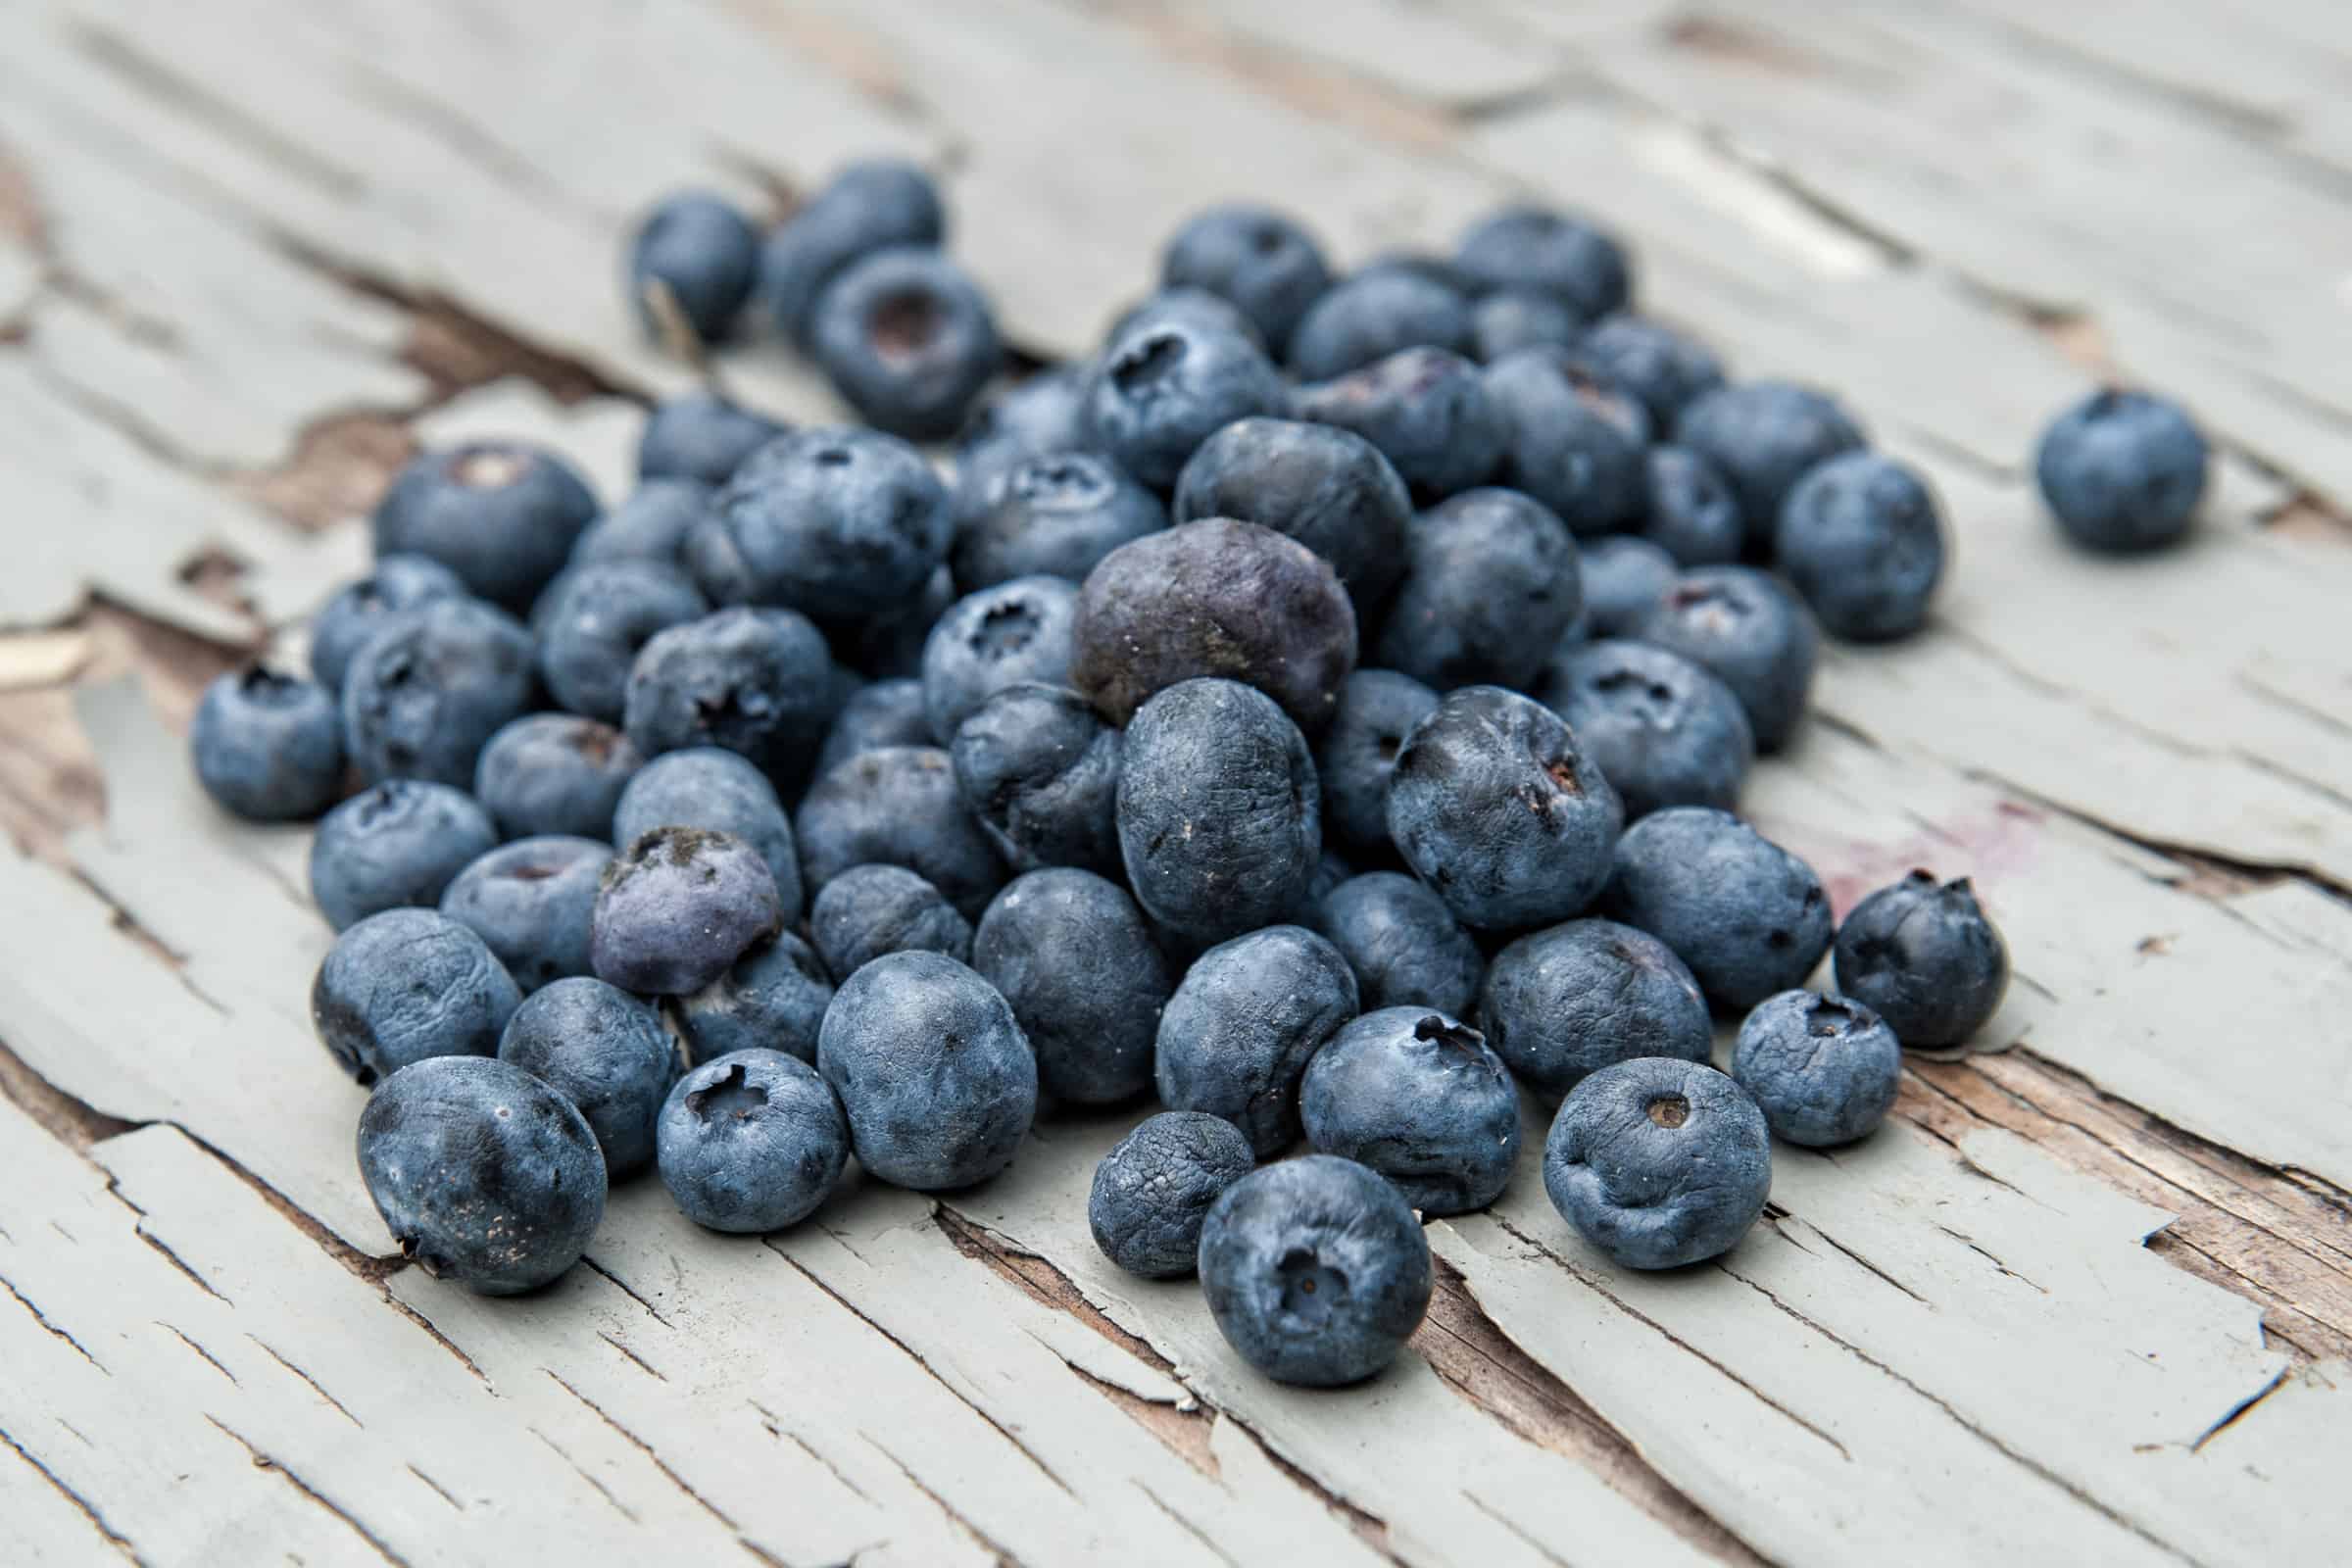 Blueberries—A Fruit Born and Bred in New Jersey